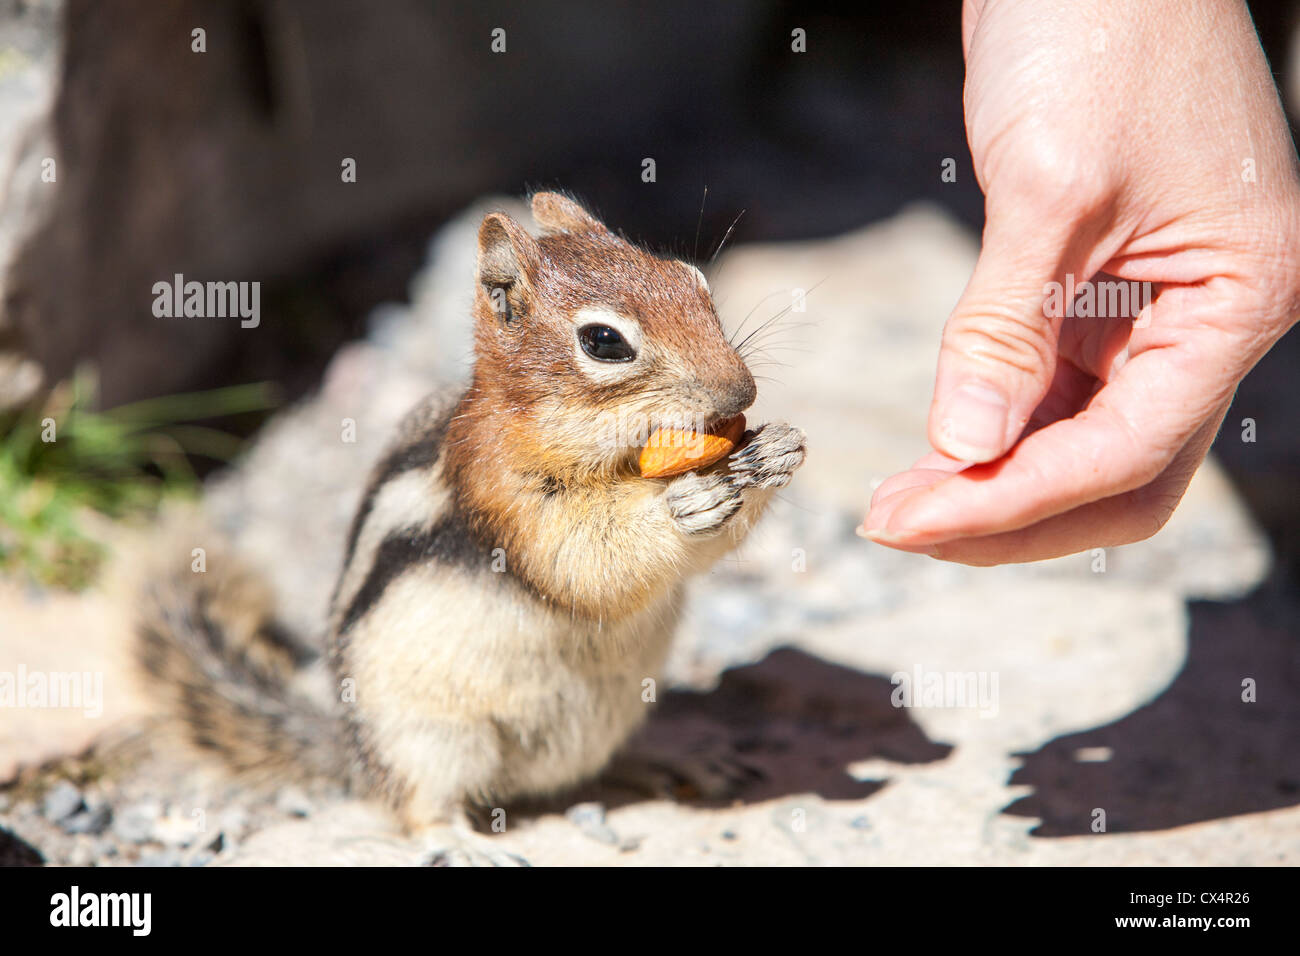 A tourist feeds a Chipmunk in the Canadian Rockies. Stock Photo